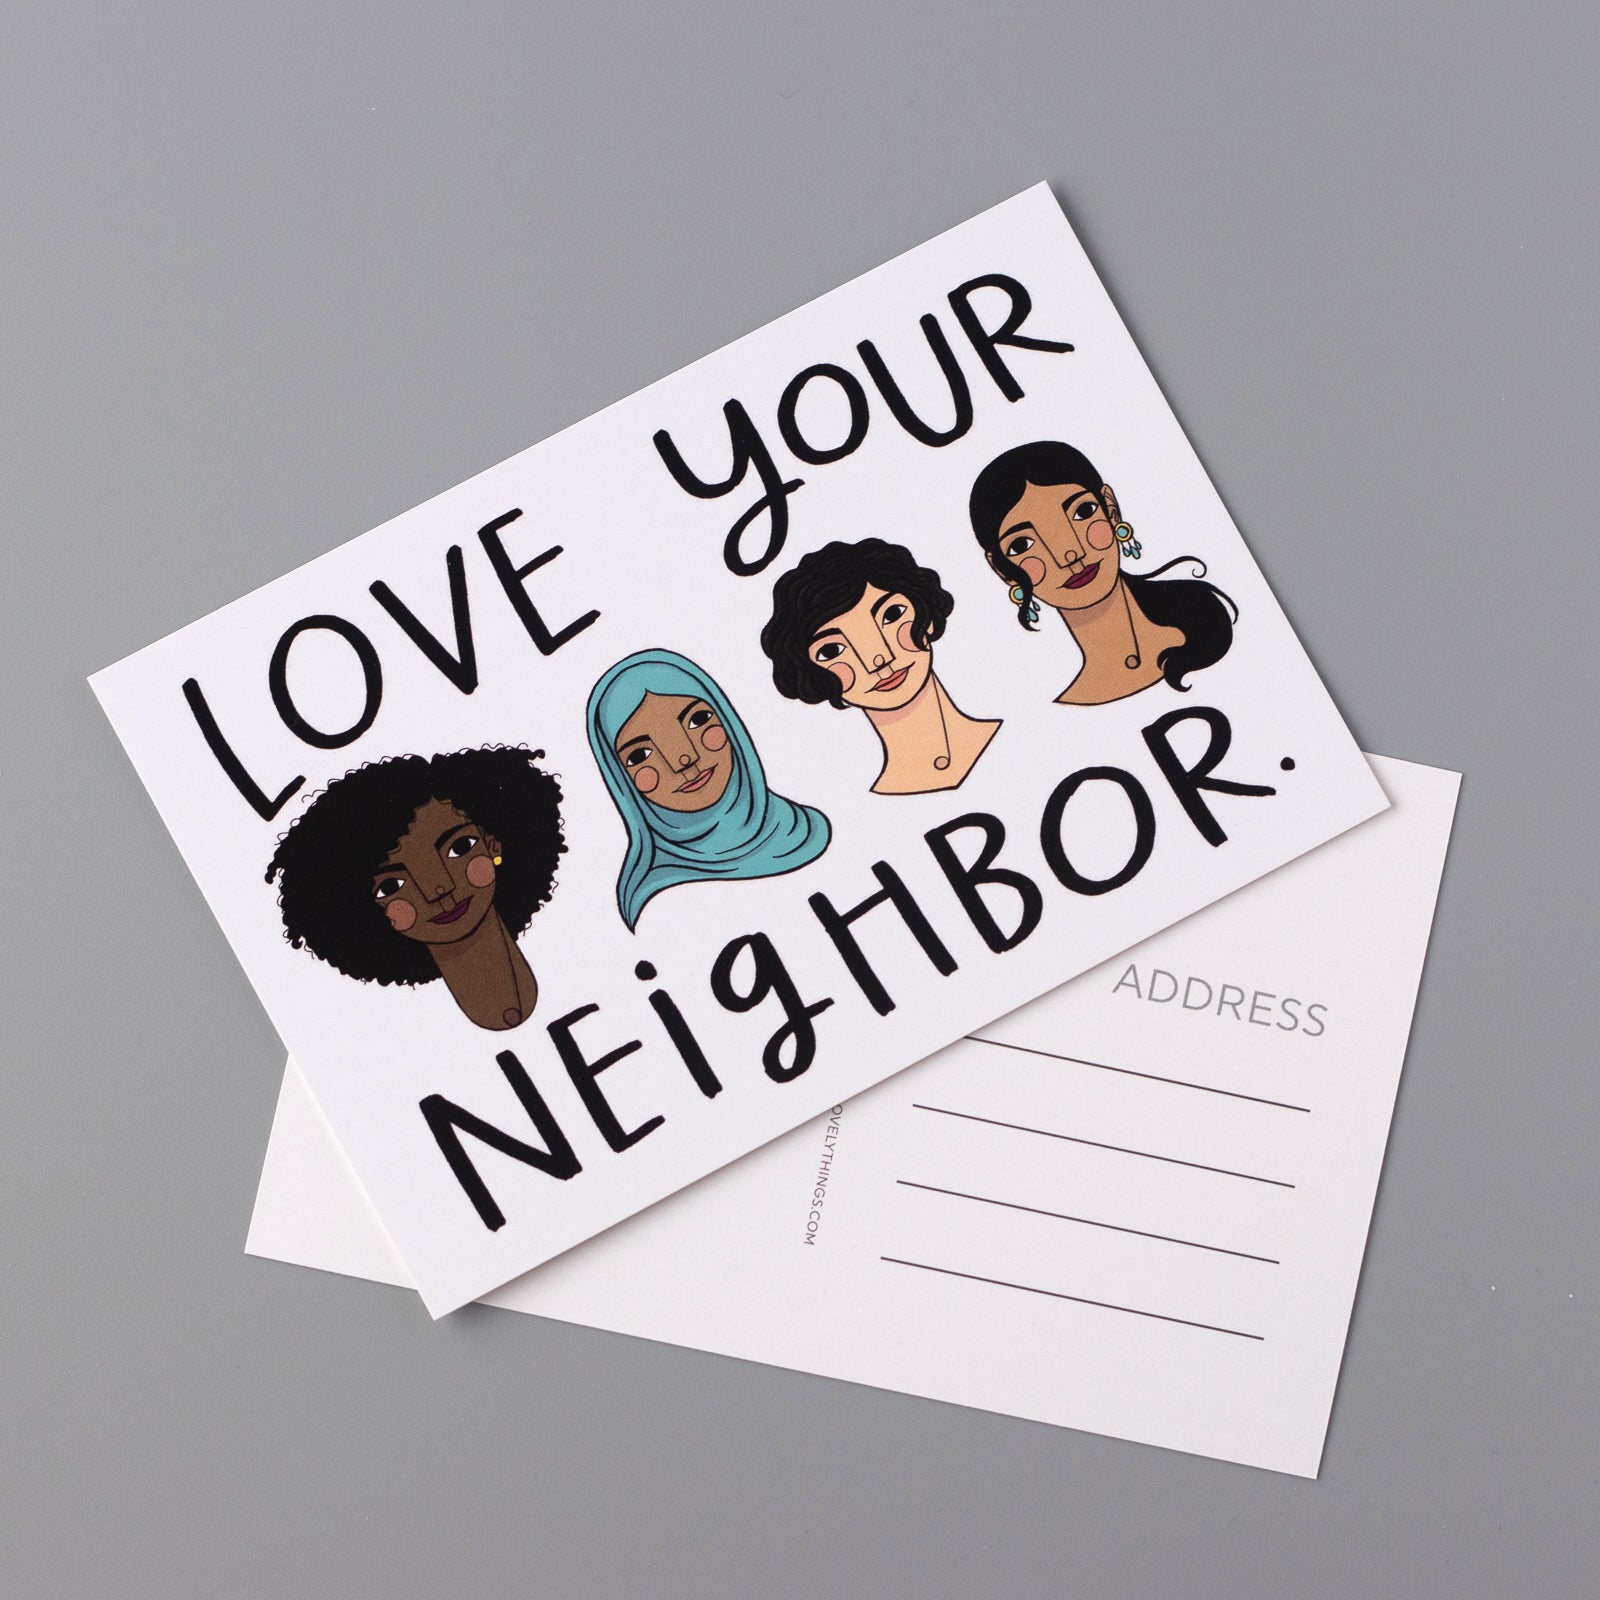 "Love Your Neighbor" postcards feature an image of four diverse women on a white background. Illustrated by Kim Bonner.